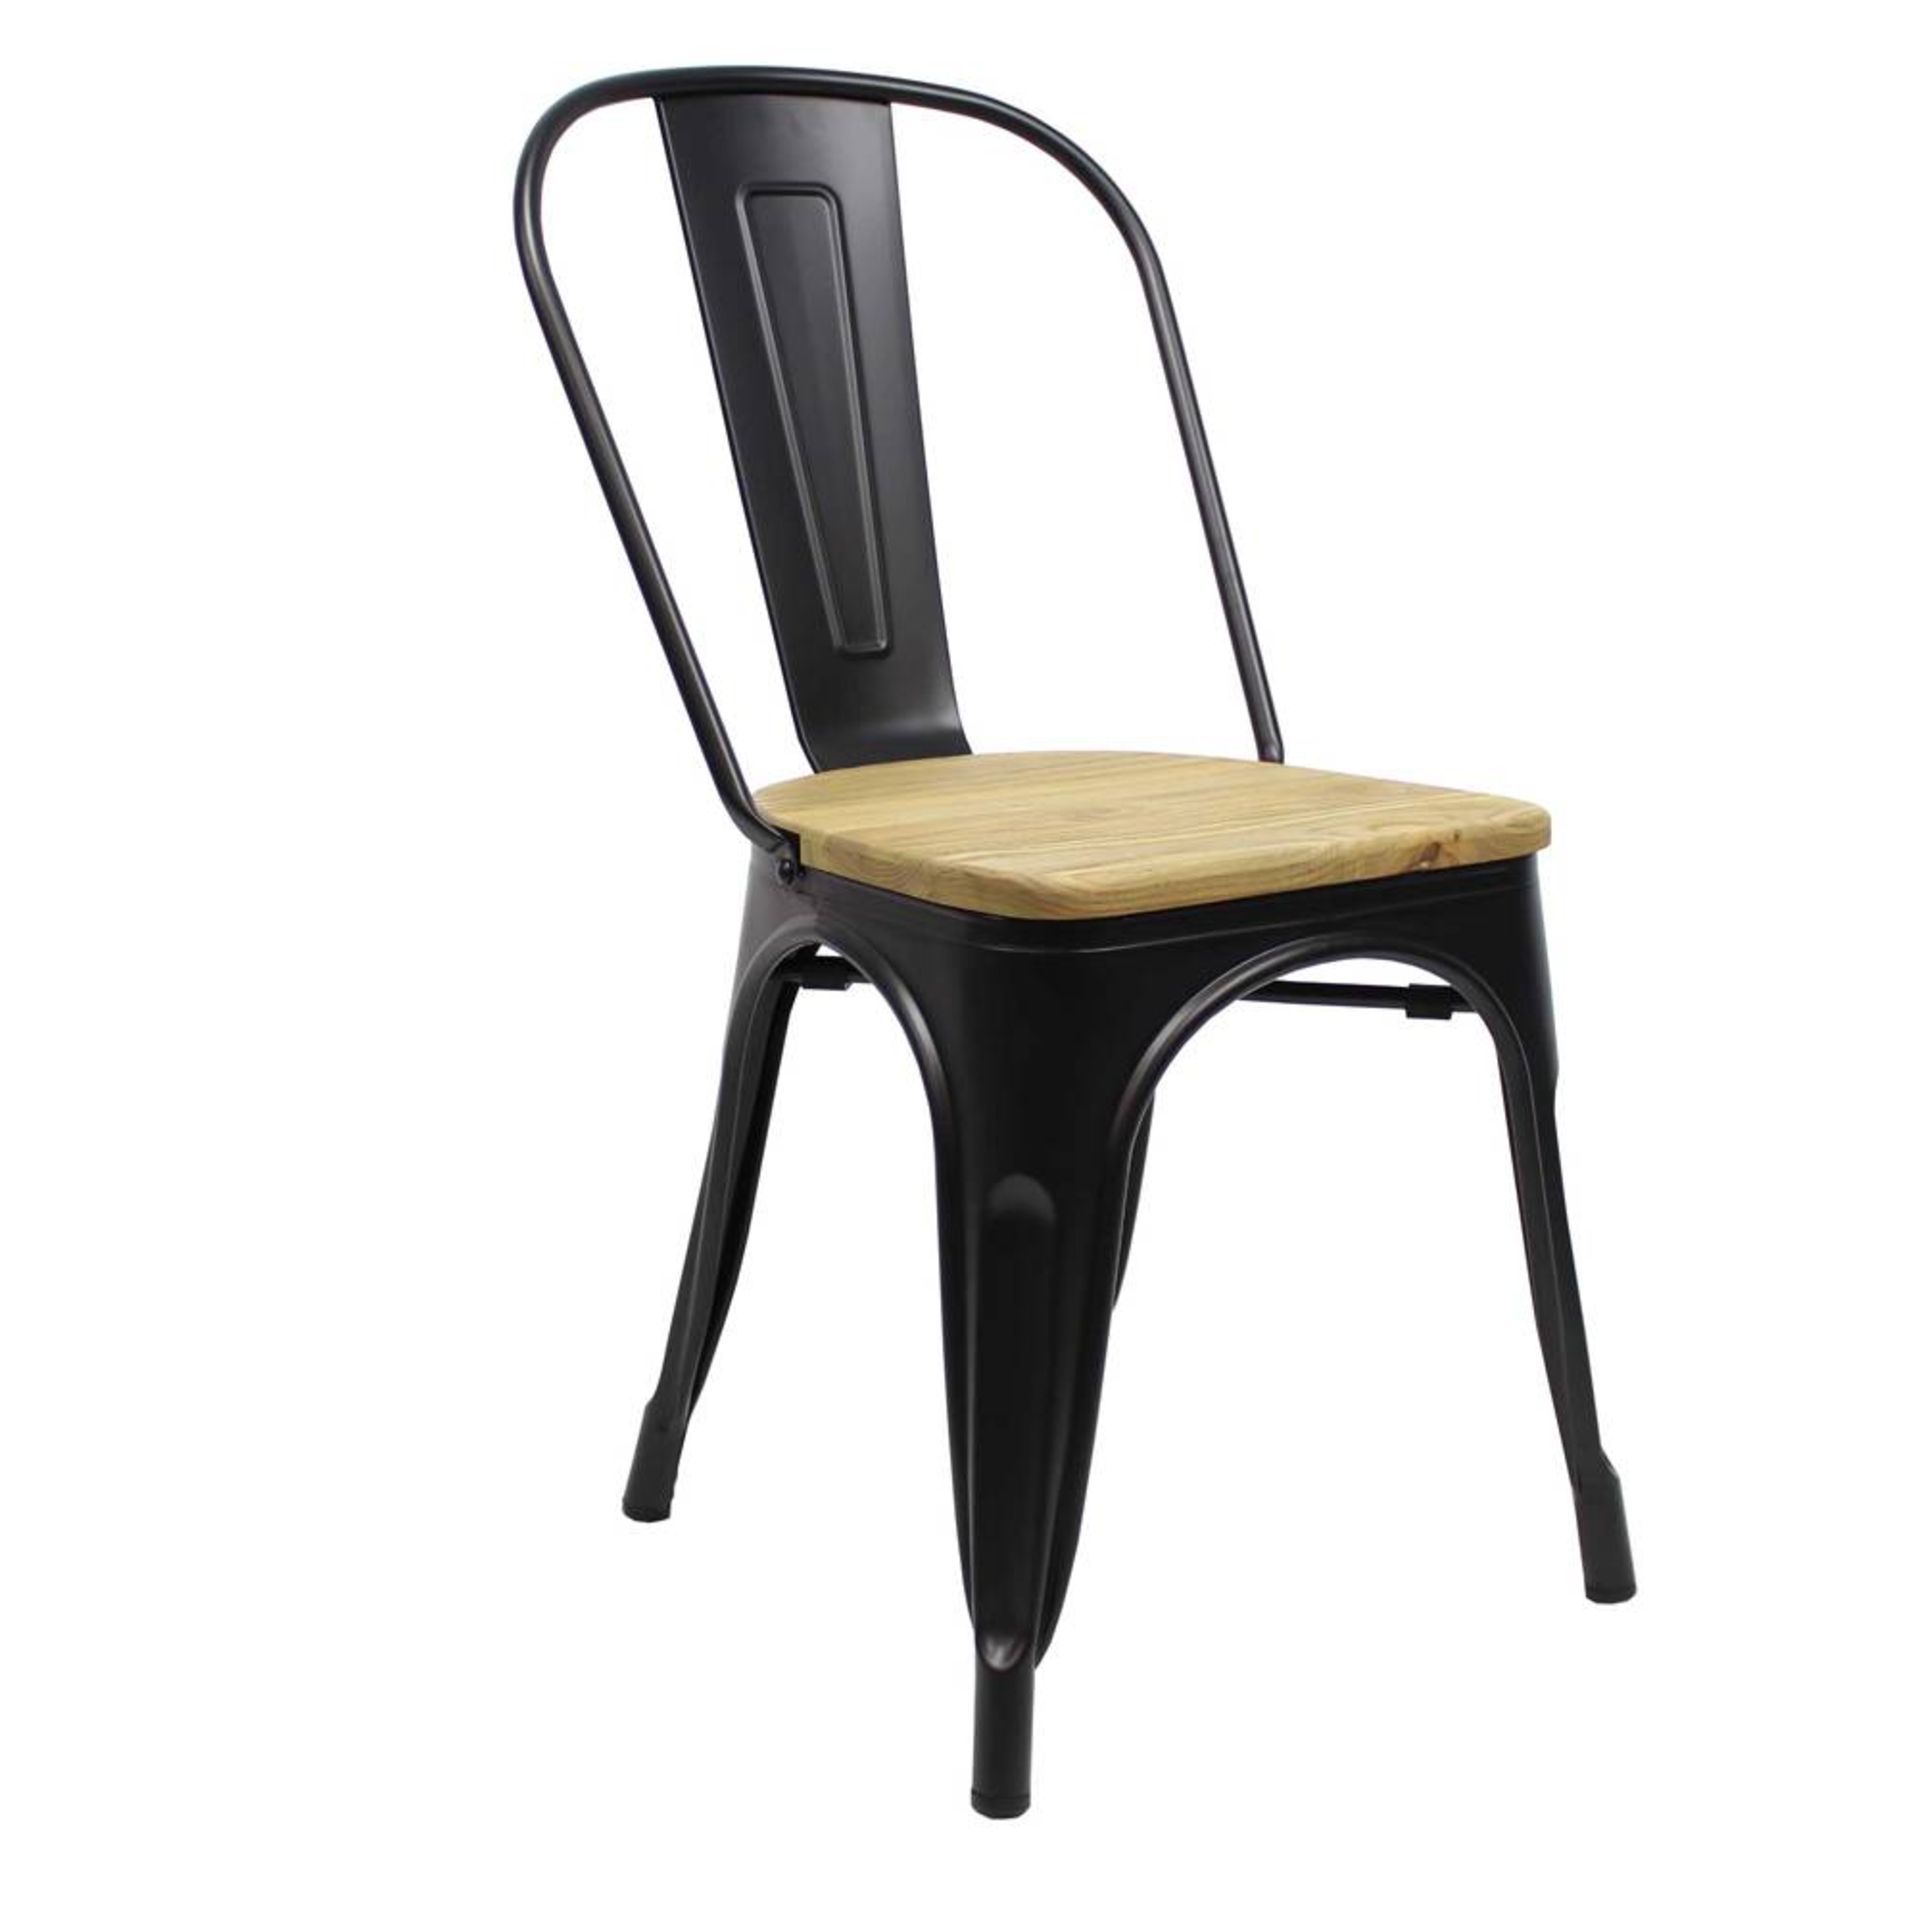 1 x Tolix Industrial Style Outdoor Bistro Table and Chair Set in Black - Includes 1 x Table and 4 - Image 3 of 7